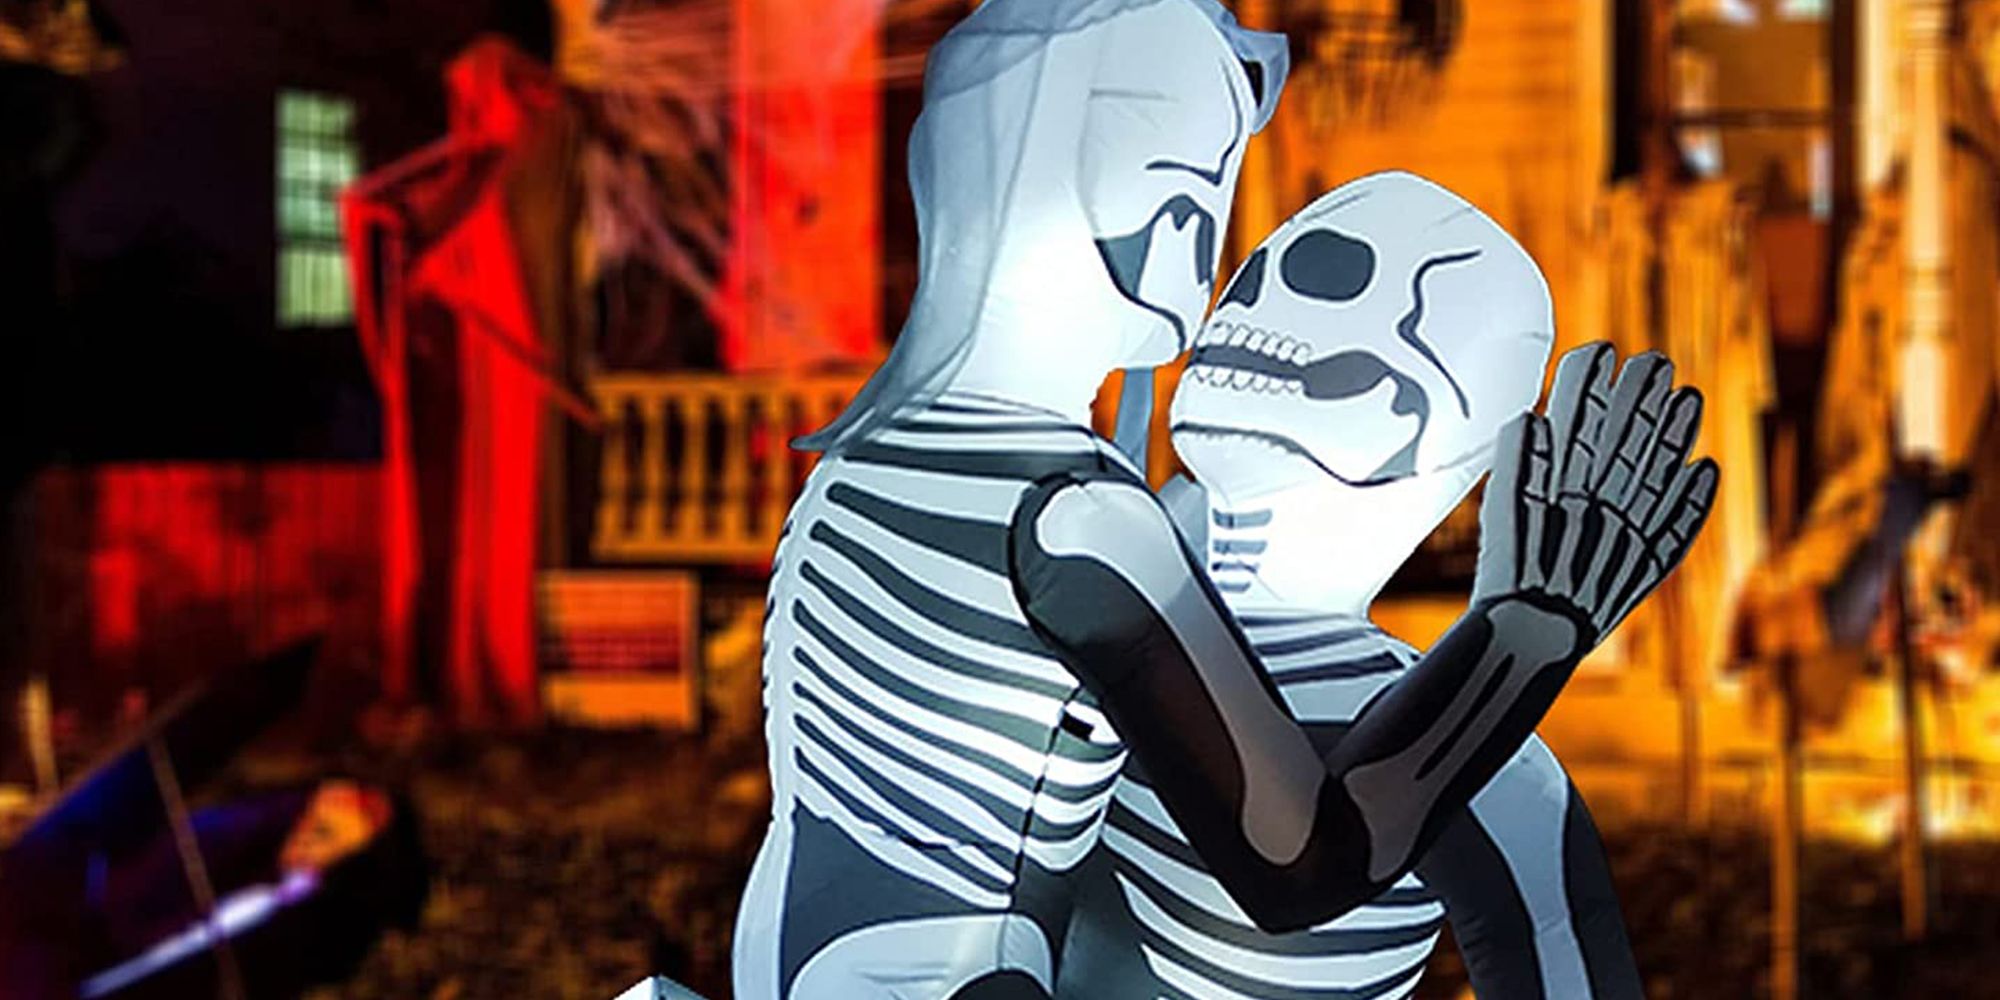 People Are Not Happy About This 'Suggestive' and 'Vulgar' Skeleton 